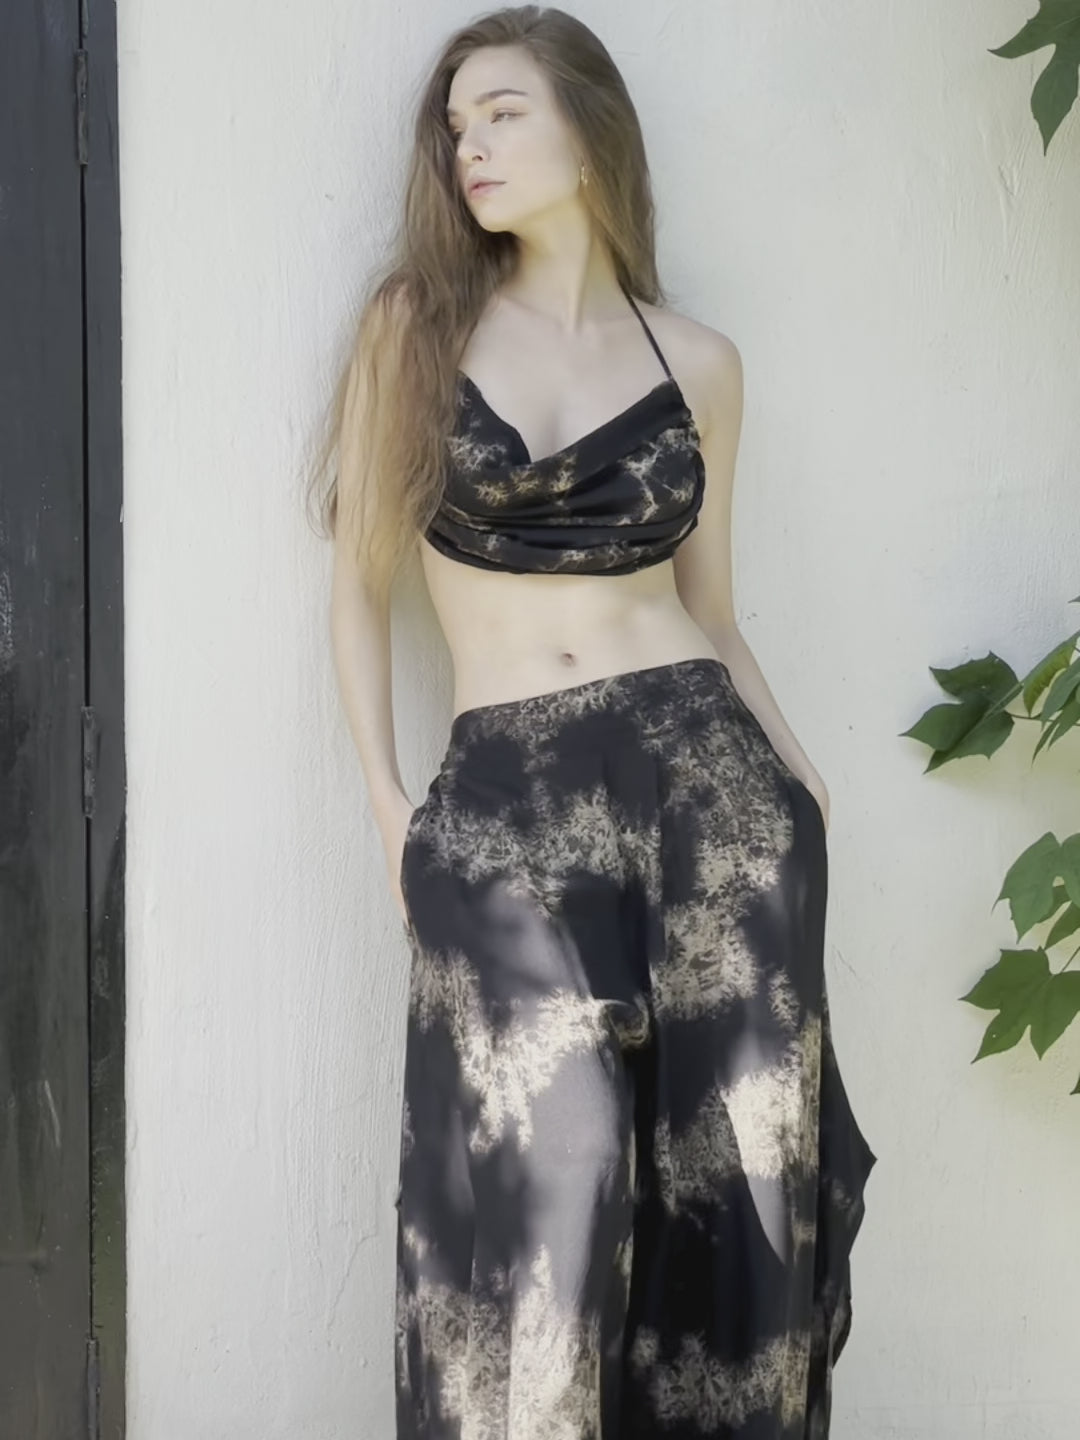 Introducing our new handcrafted MAYA tie dye Boho Crop top, where playful style, bohemian outfits, and comfort come together effortlessly.